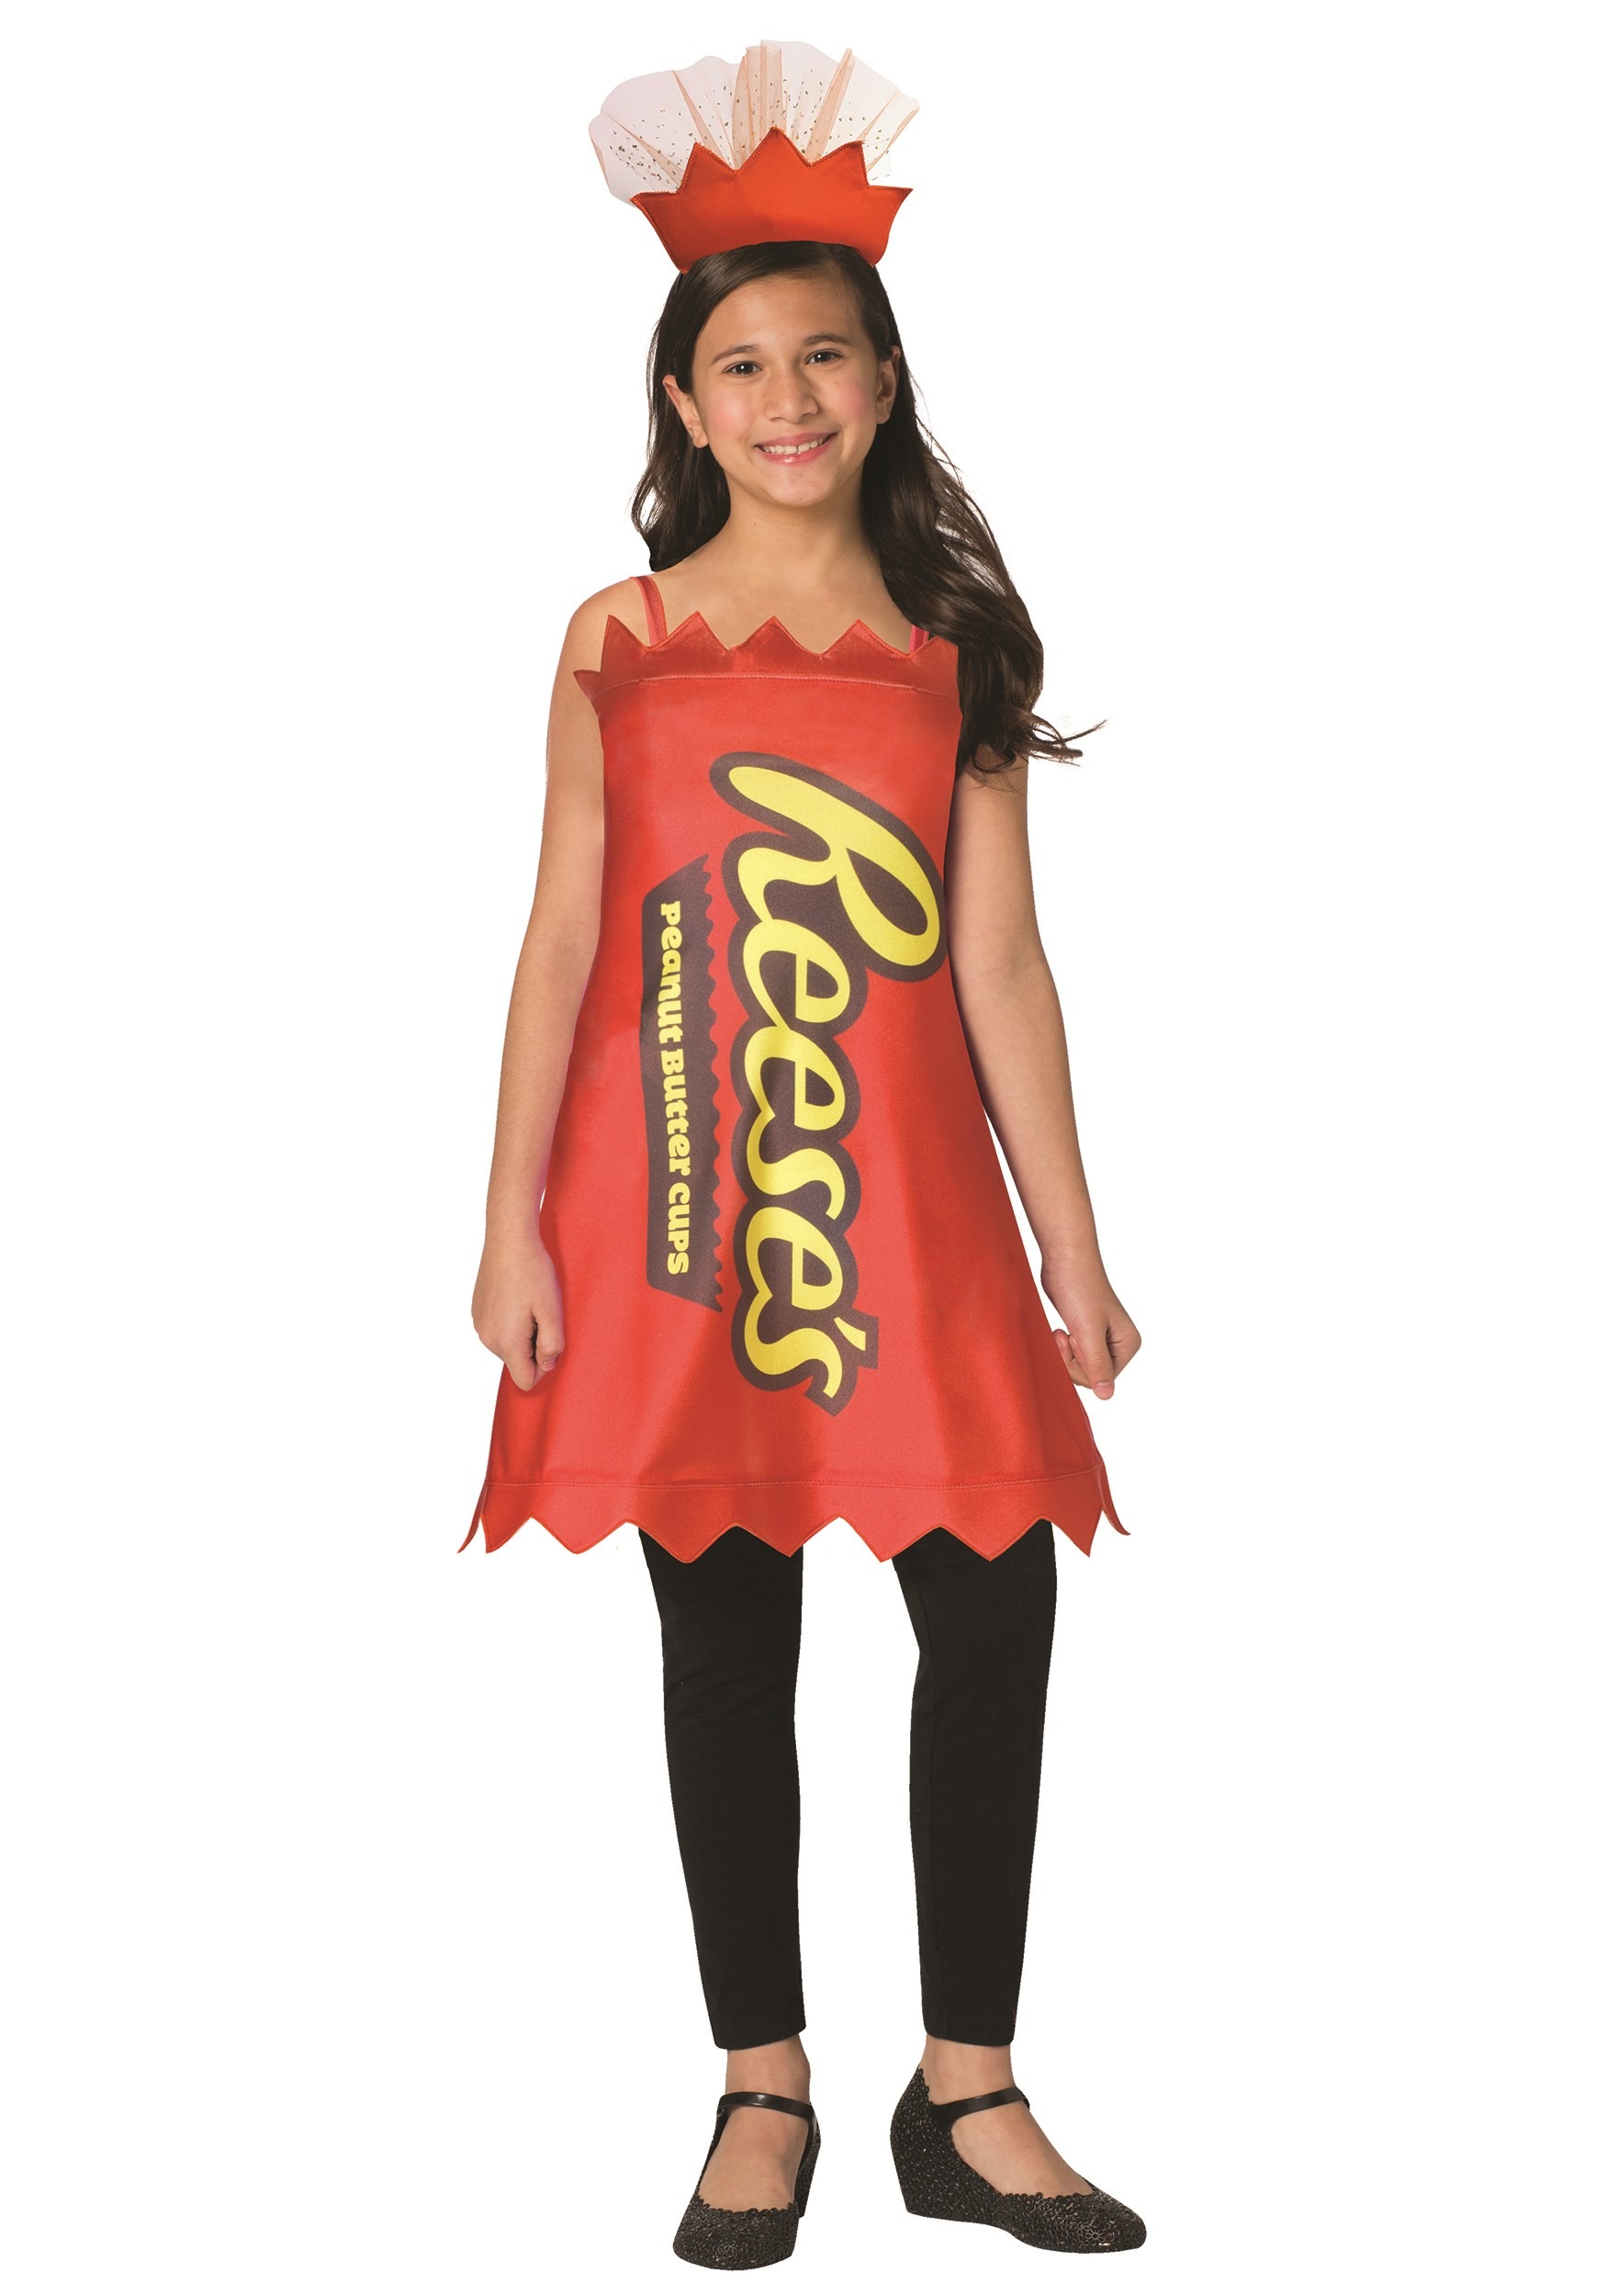 Reeses Peanut Butter Cup Costume